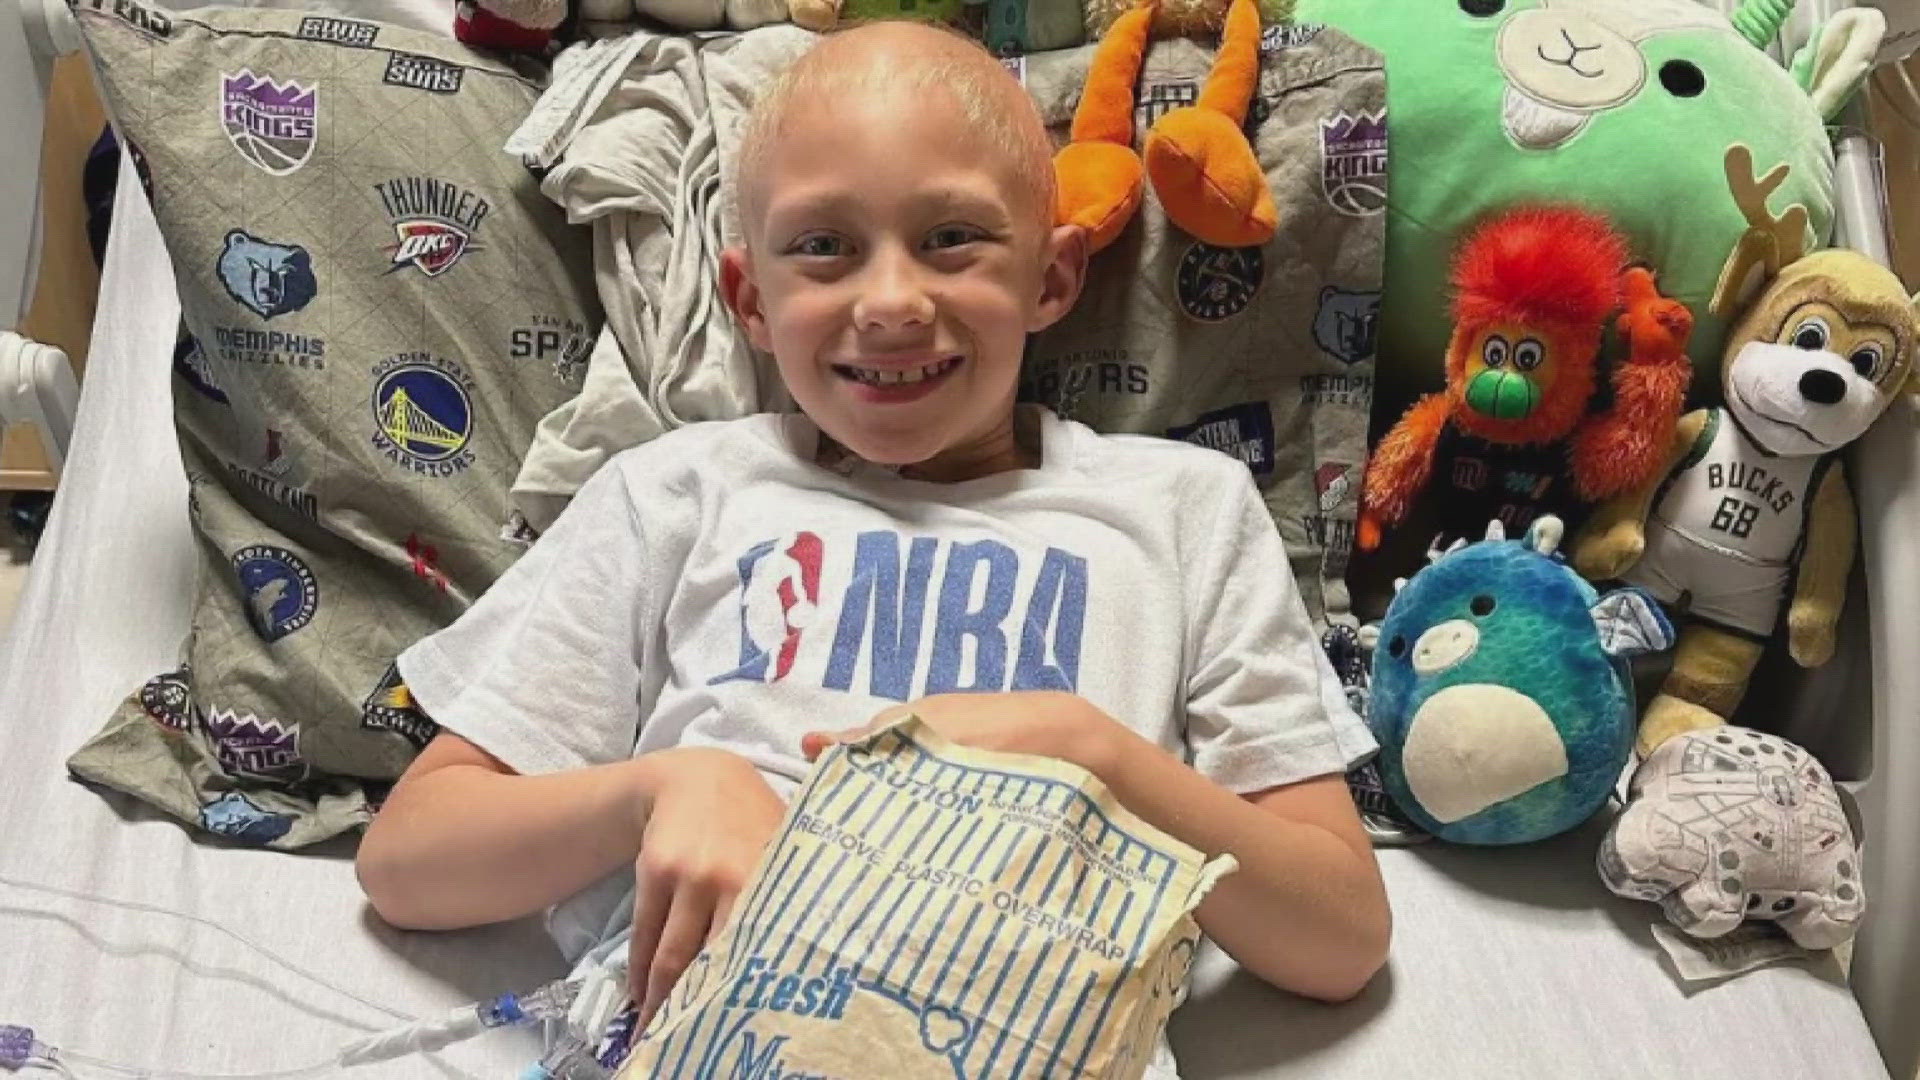 The young fan isn't letting his cancer battle get in the way of enjoying the joy of basketball.